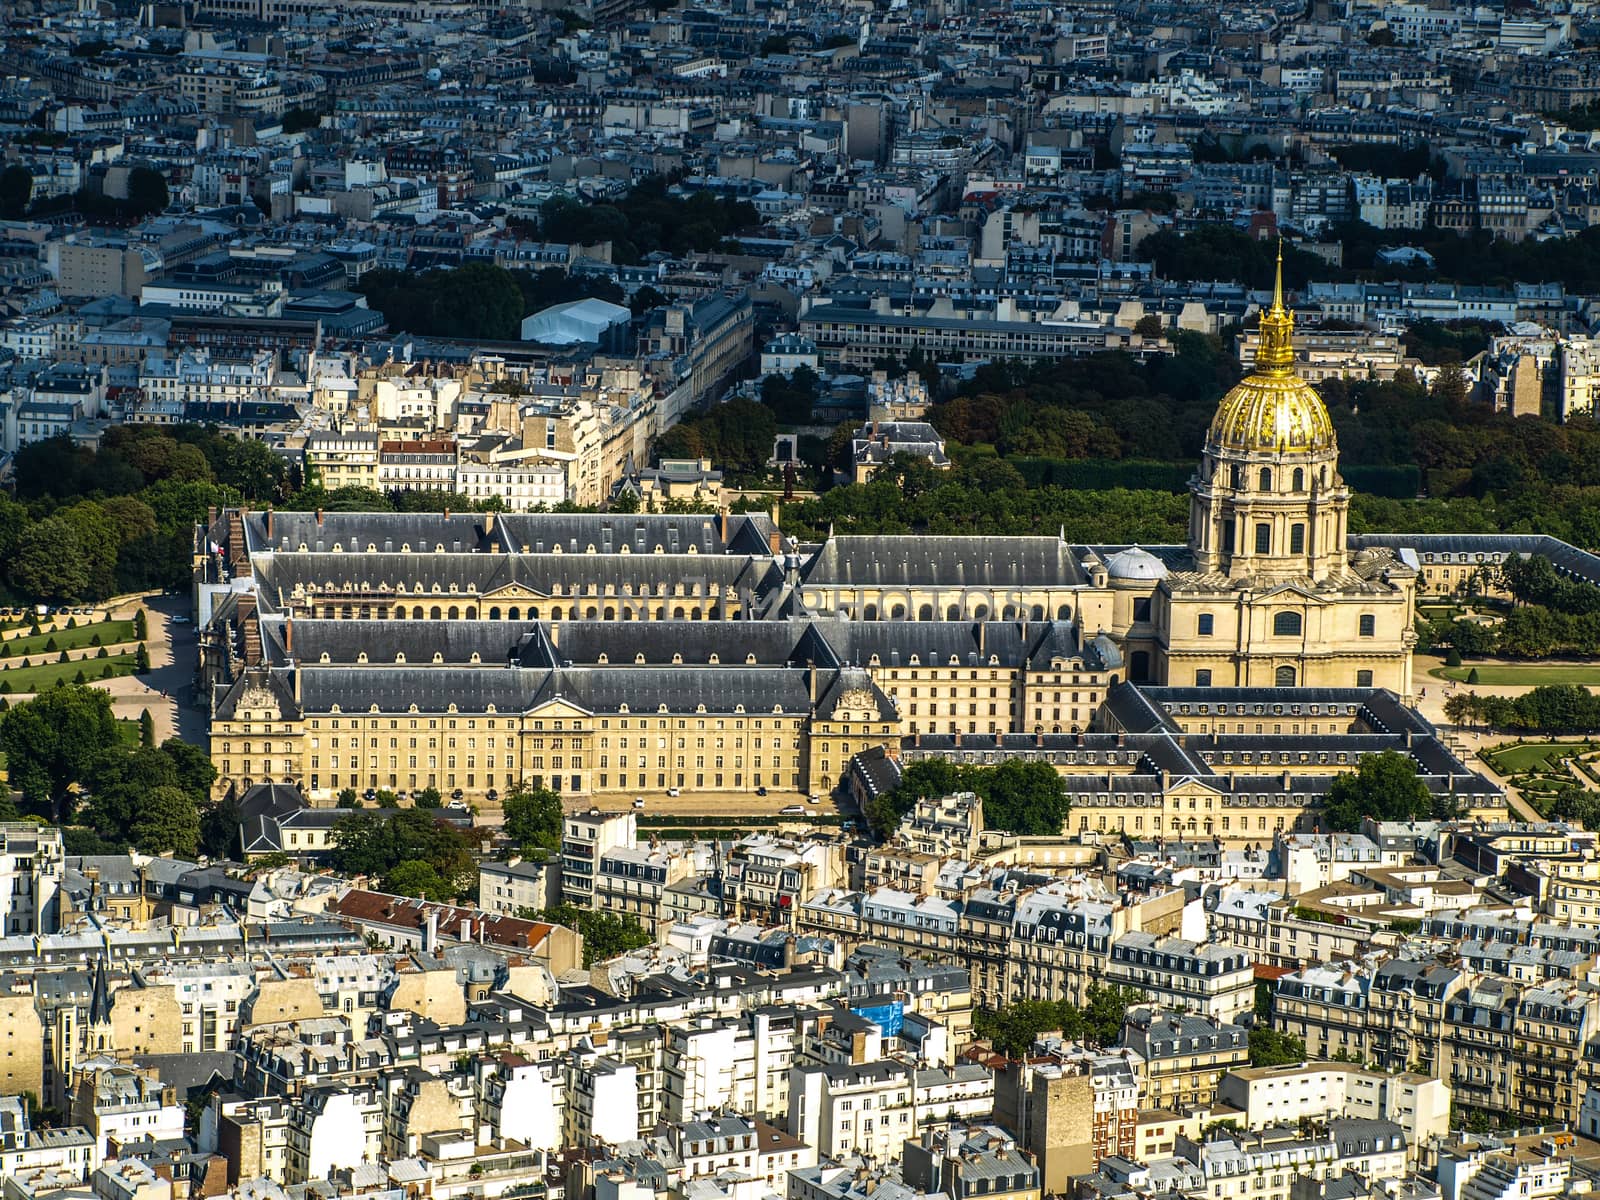 Invalides - view from Eiffel tower (Paris, France)